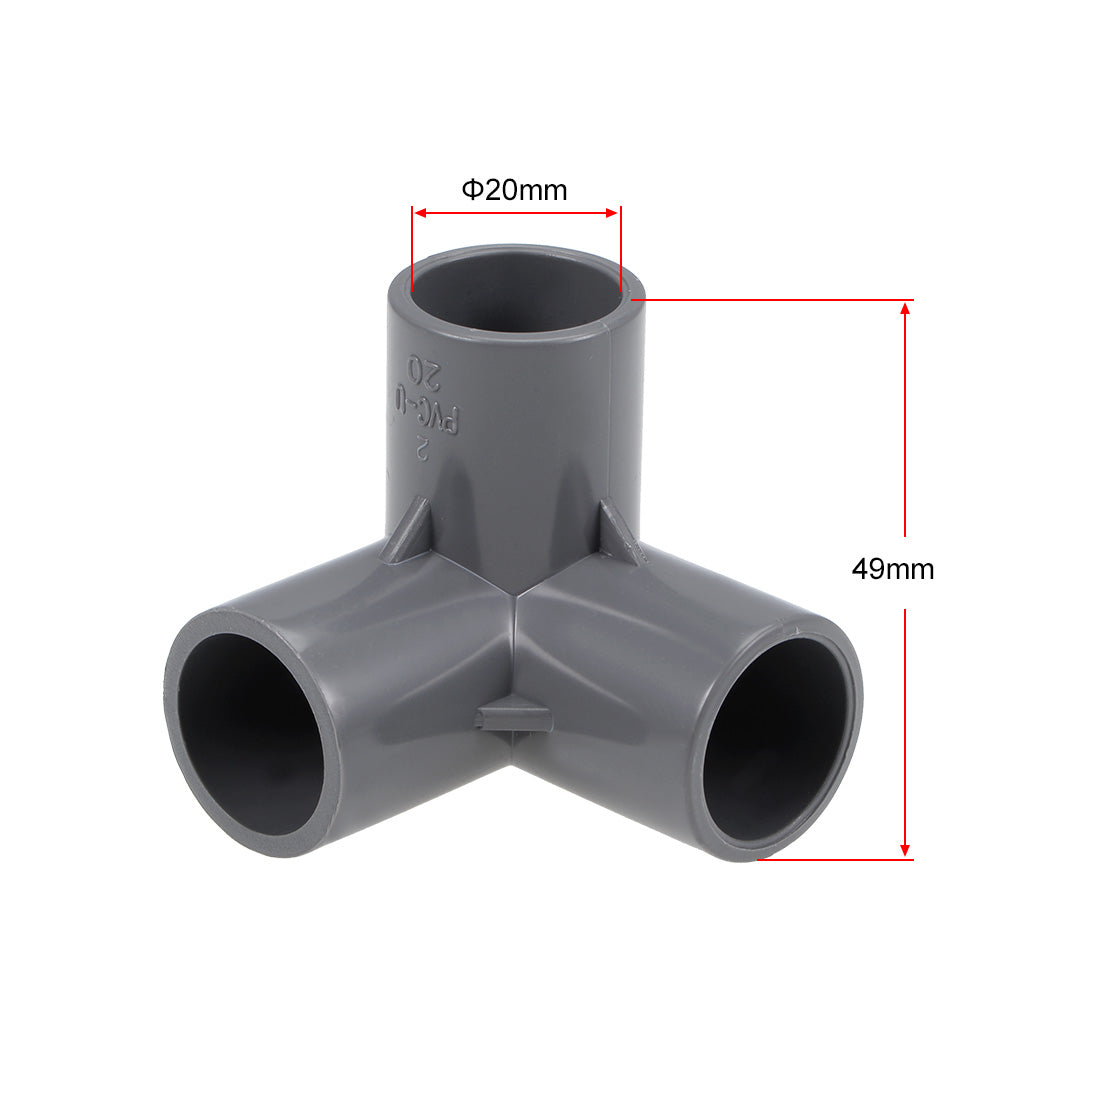 uxcell Uxcell 3-Way Elbow Metric PVC Fitting, 20mm Socket, Tee Corner Fittings Gray 10 Pcs